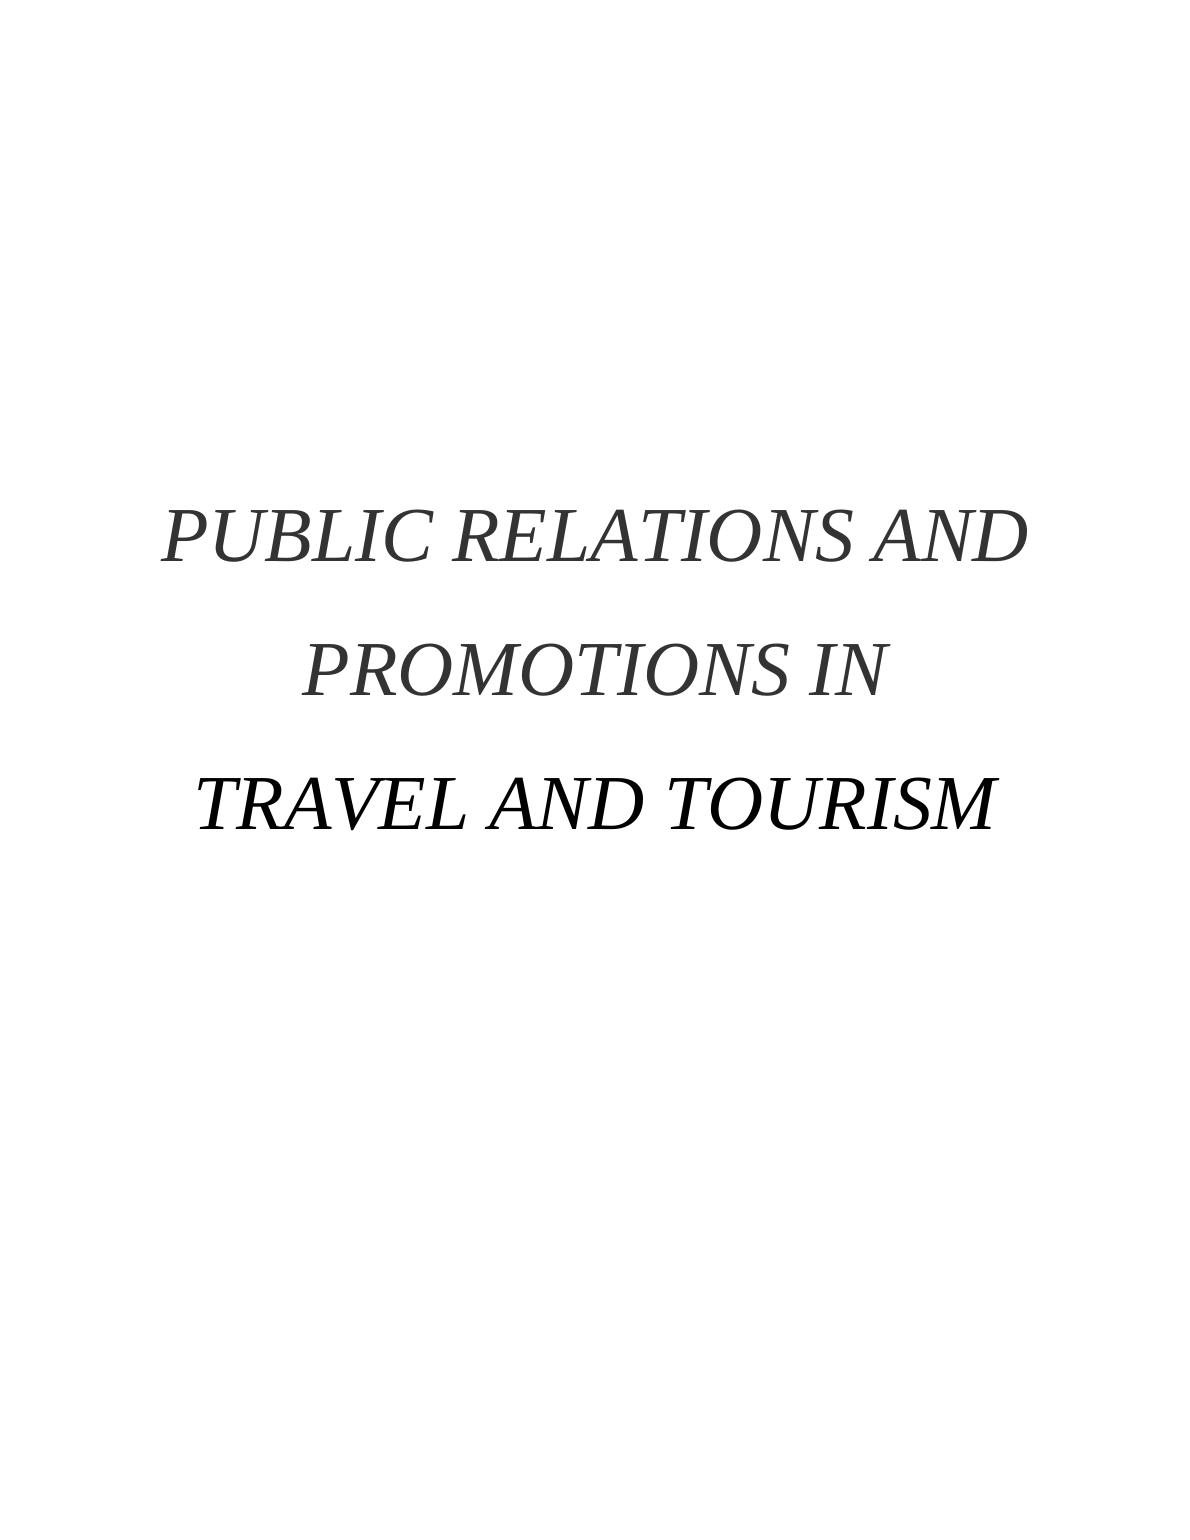 Public relations and promotions in travel and tourism introduction_1